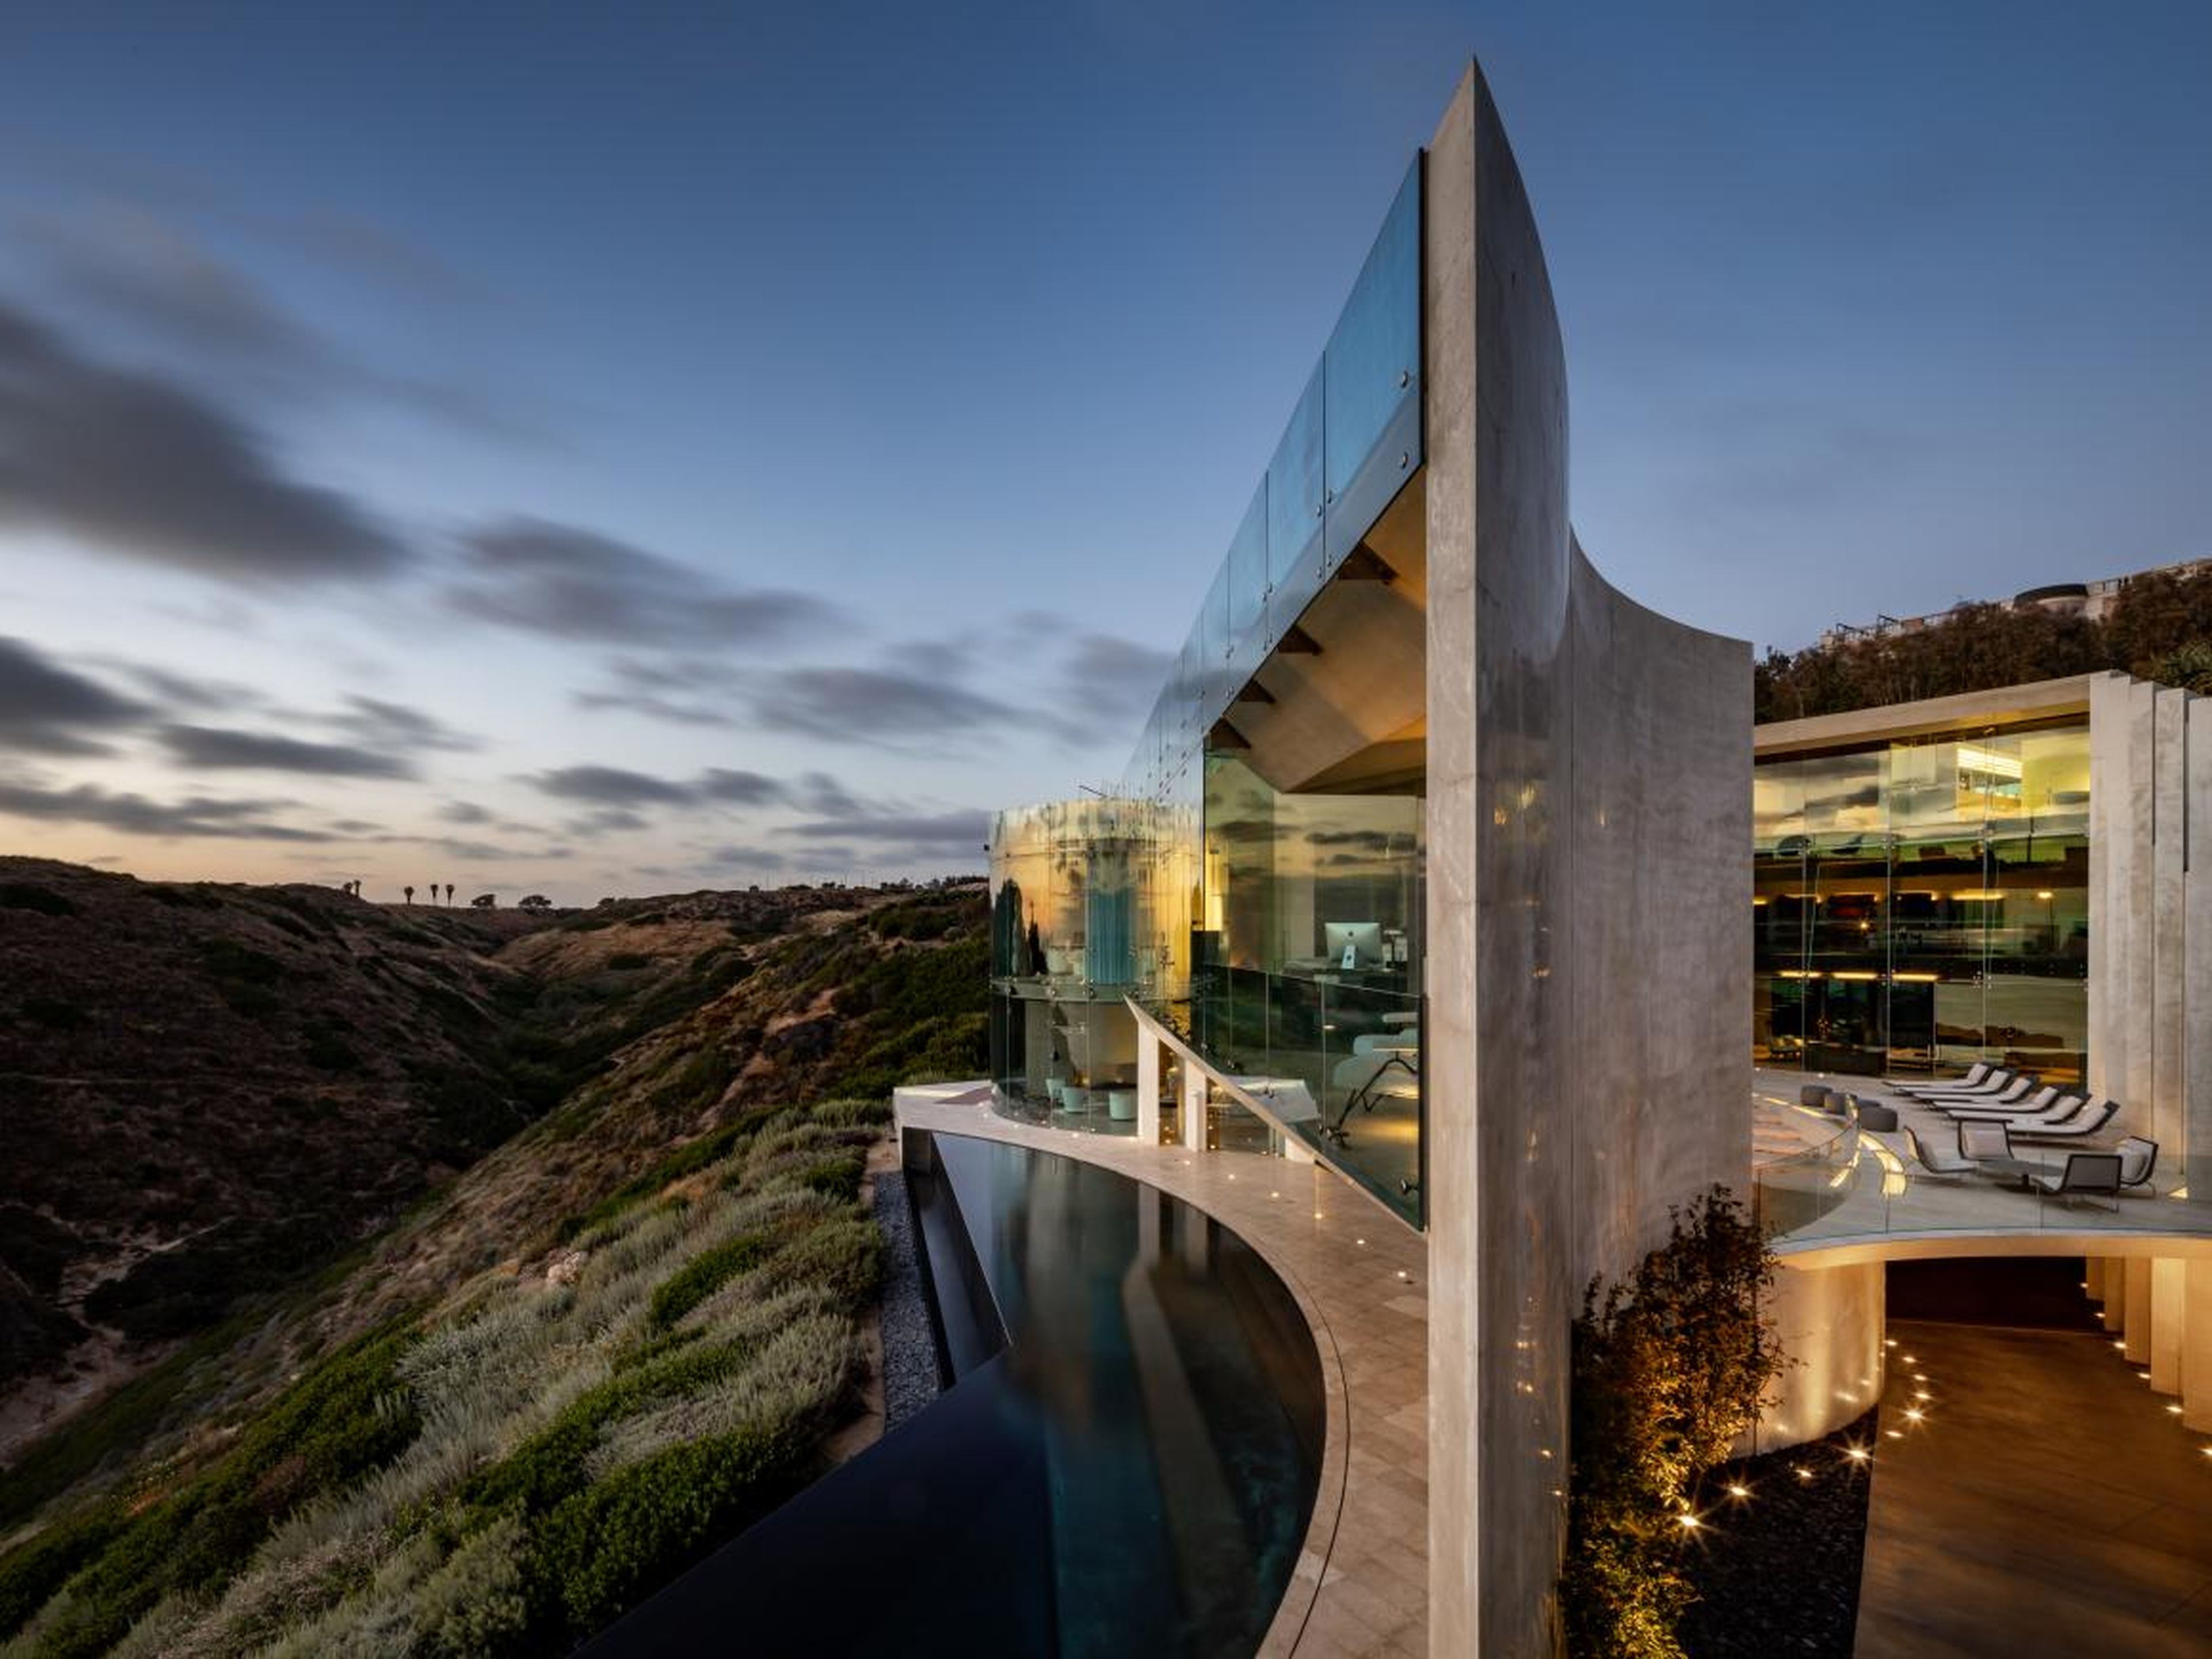 With its $20.8 million sale price, the Razor House is the most expensive house sold in La Jolla so far in 2019, according to Douglas Elliman.